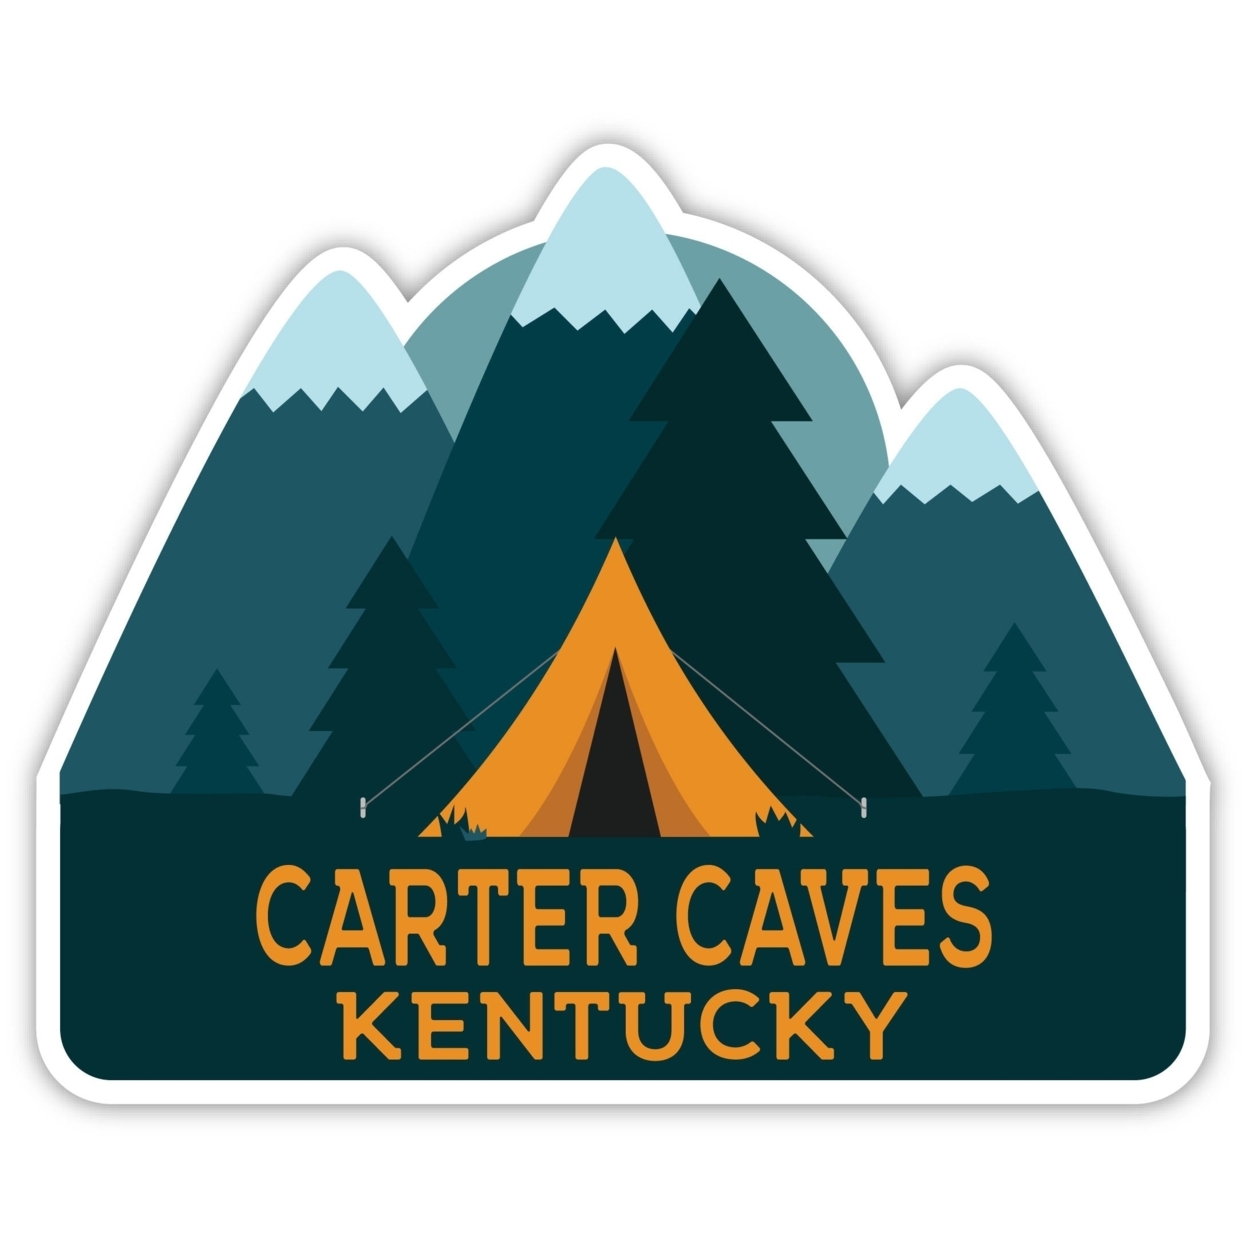 Carter Caves Kentucky Souvenir Decorative Stickers (Choose Theme And Size) - Single Unit, 6-Inch, Tent